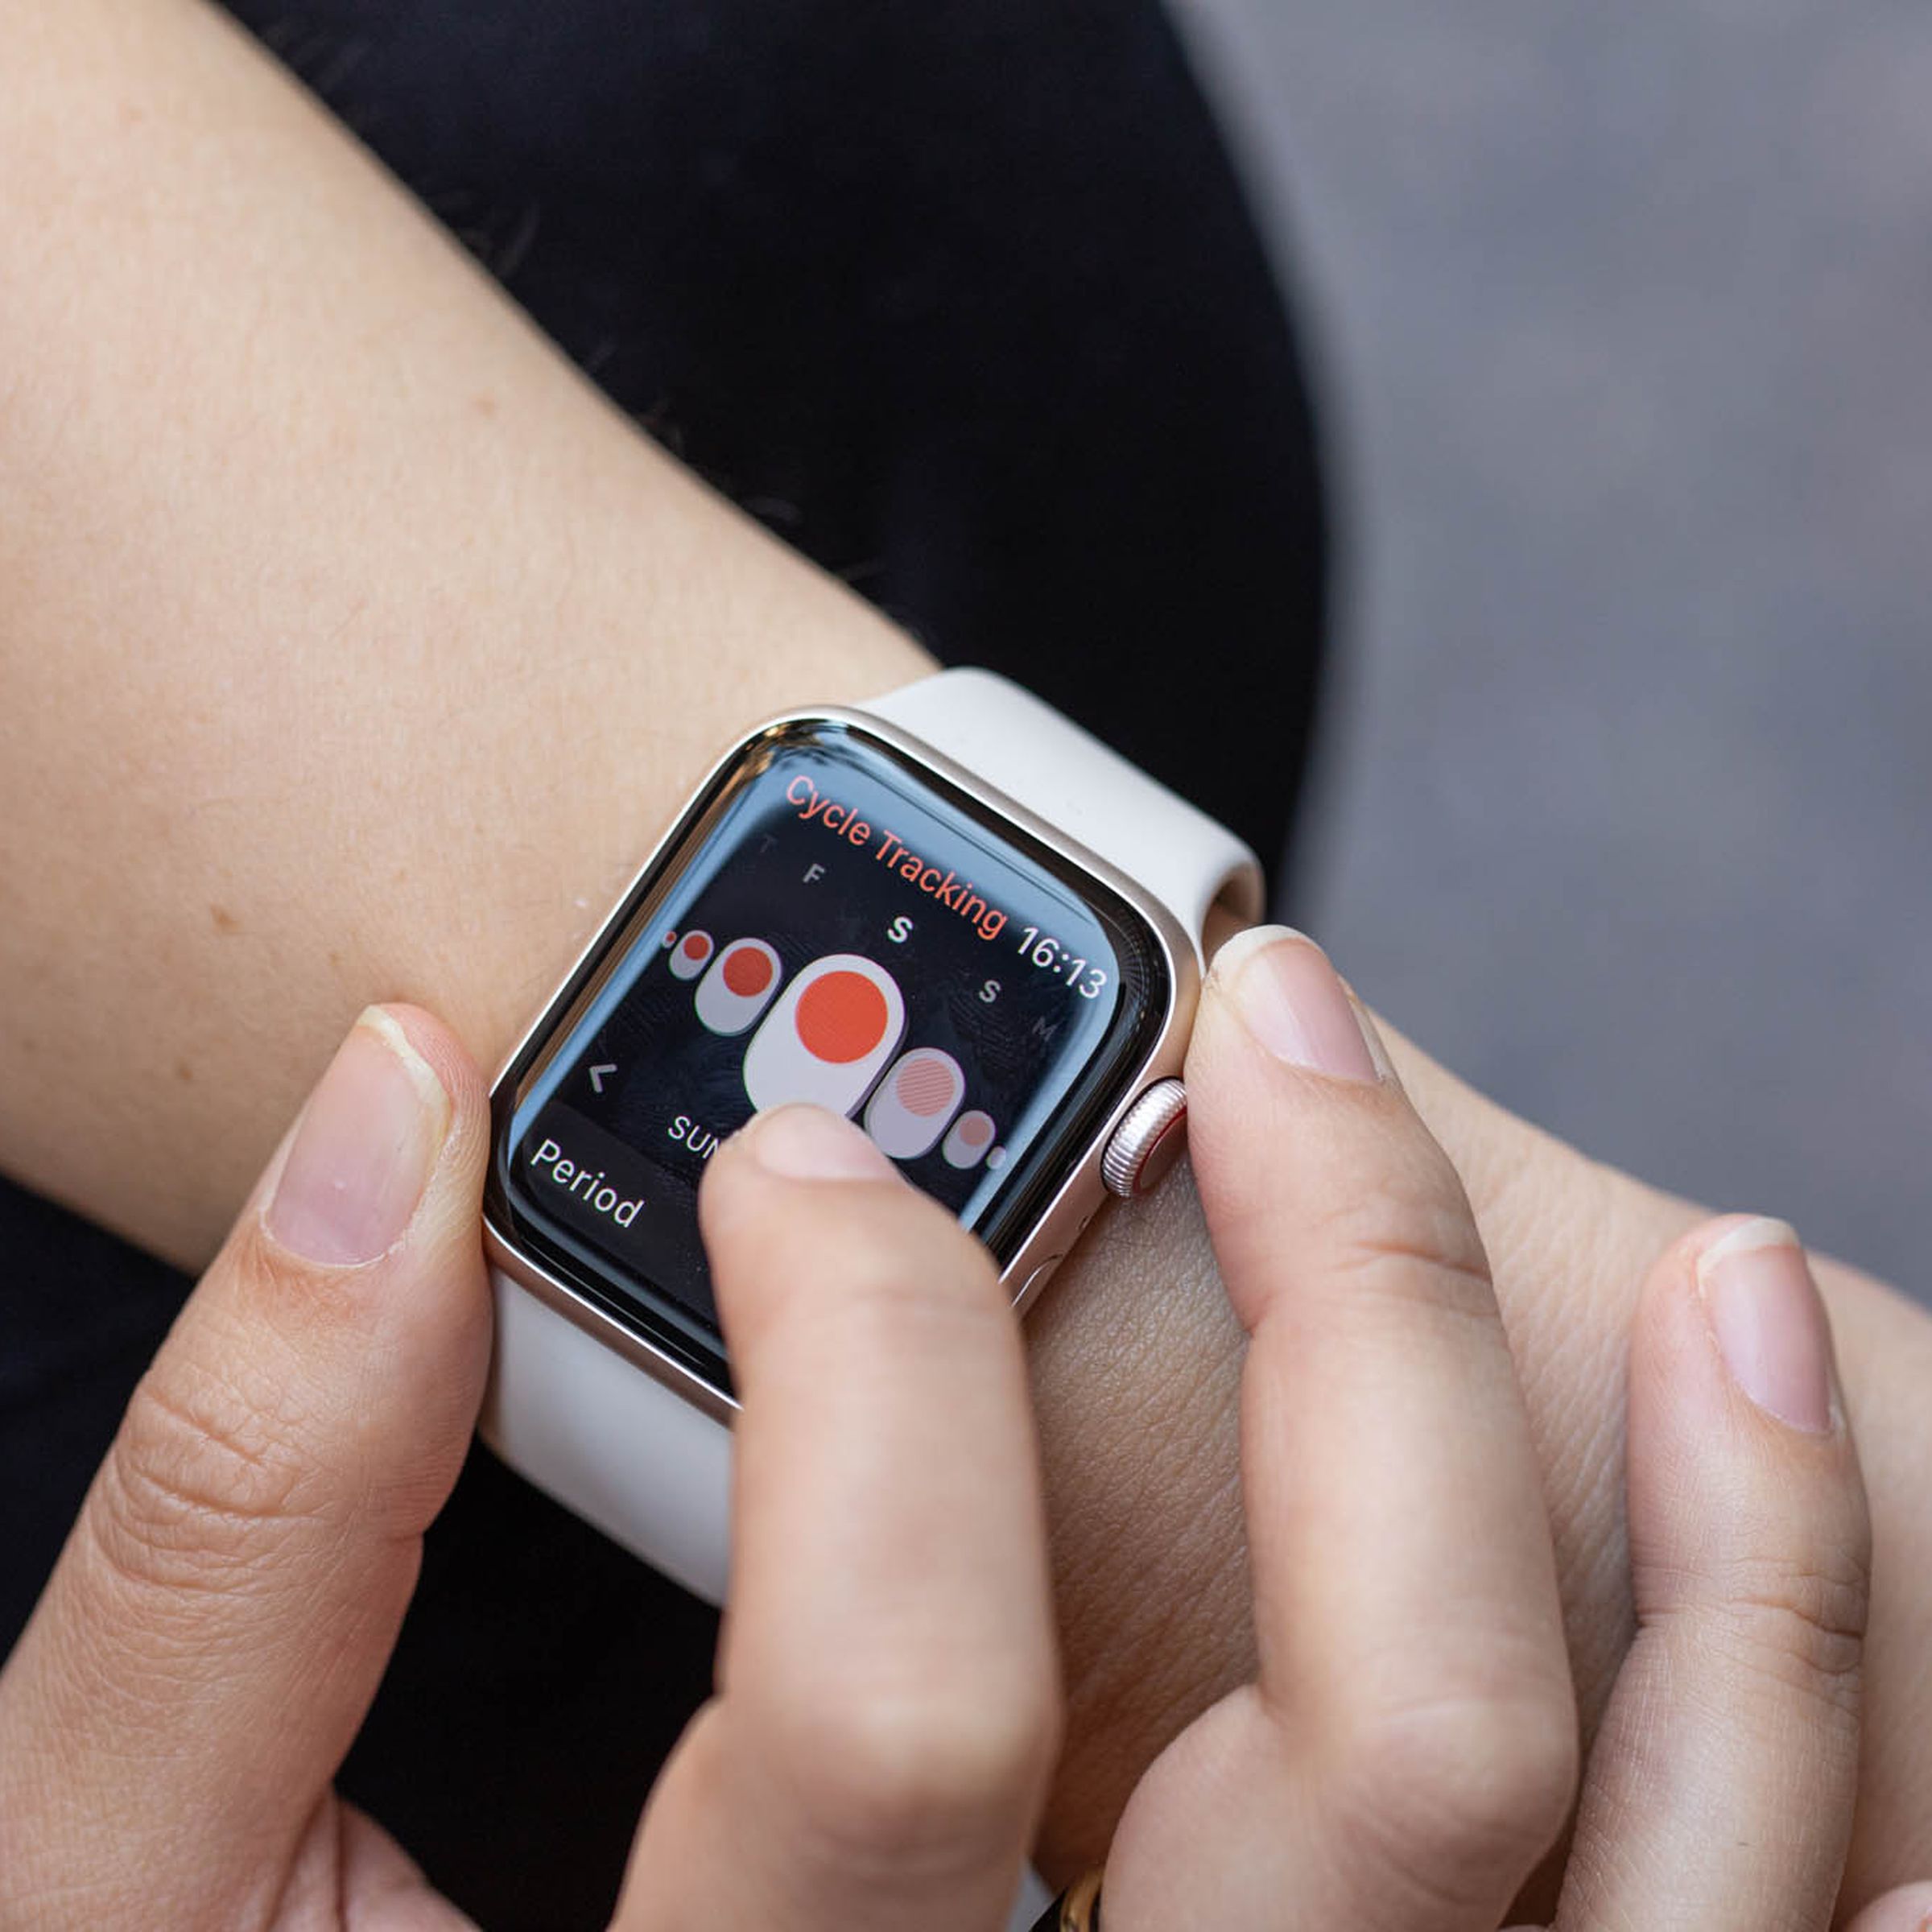 Apple Watch on a wrist showing a screen that lets a user log a period